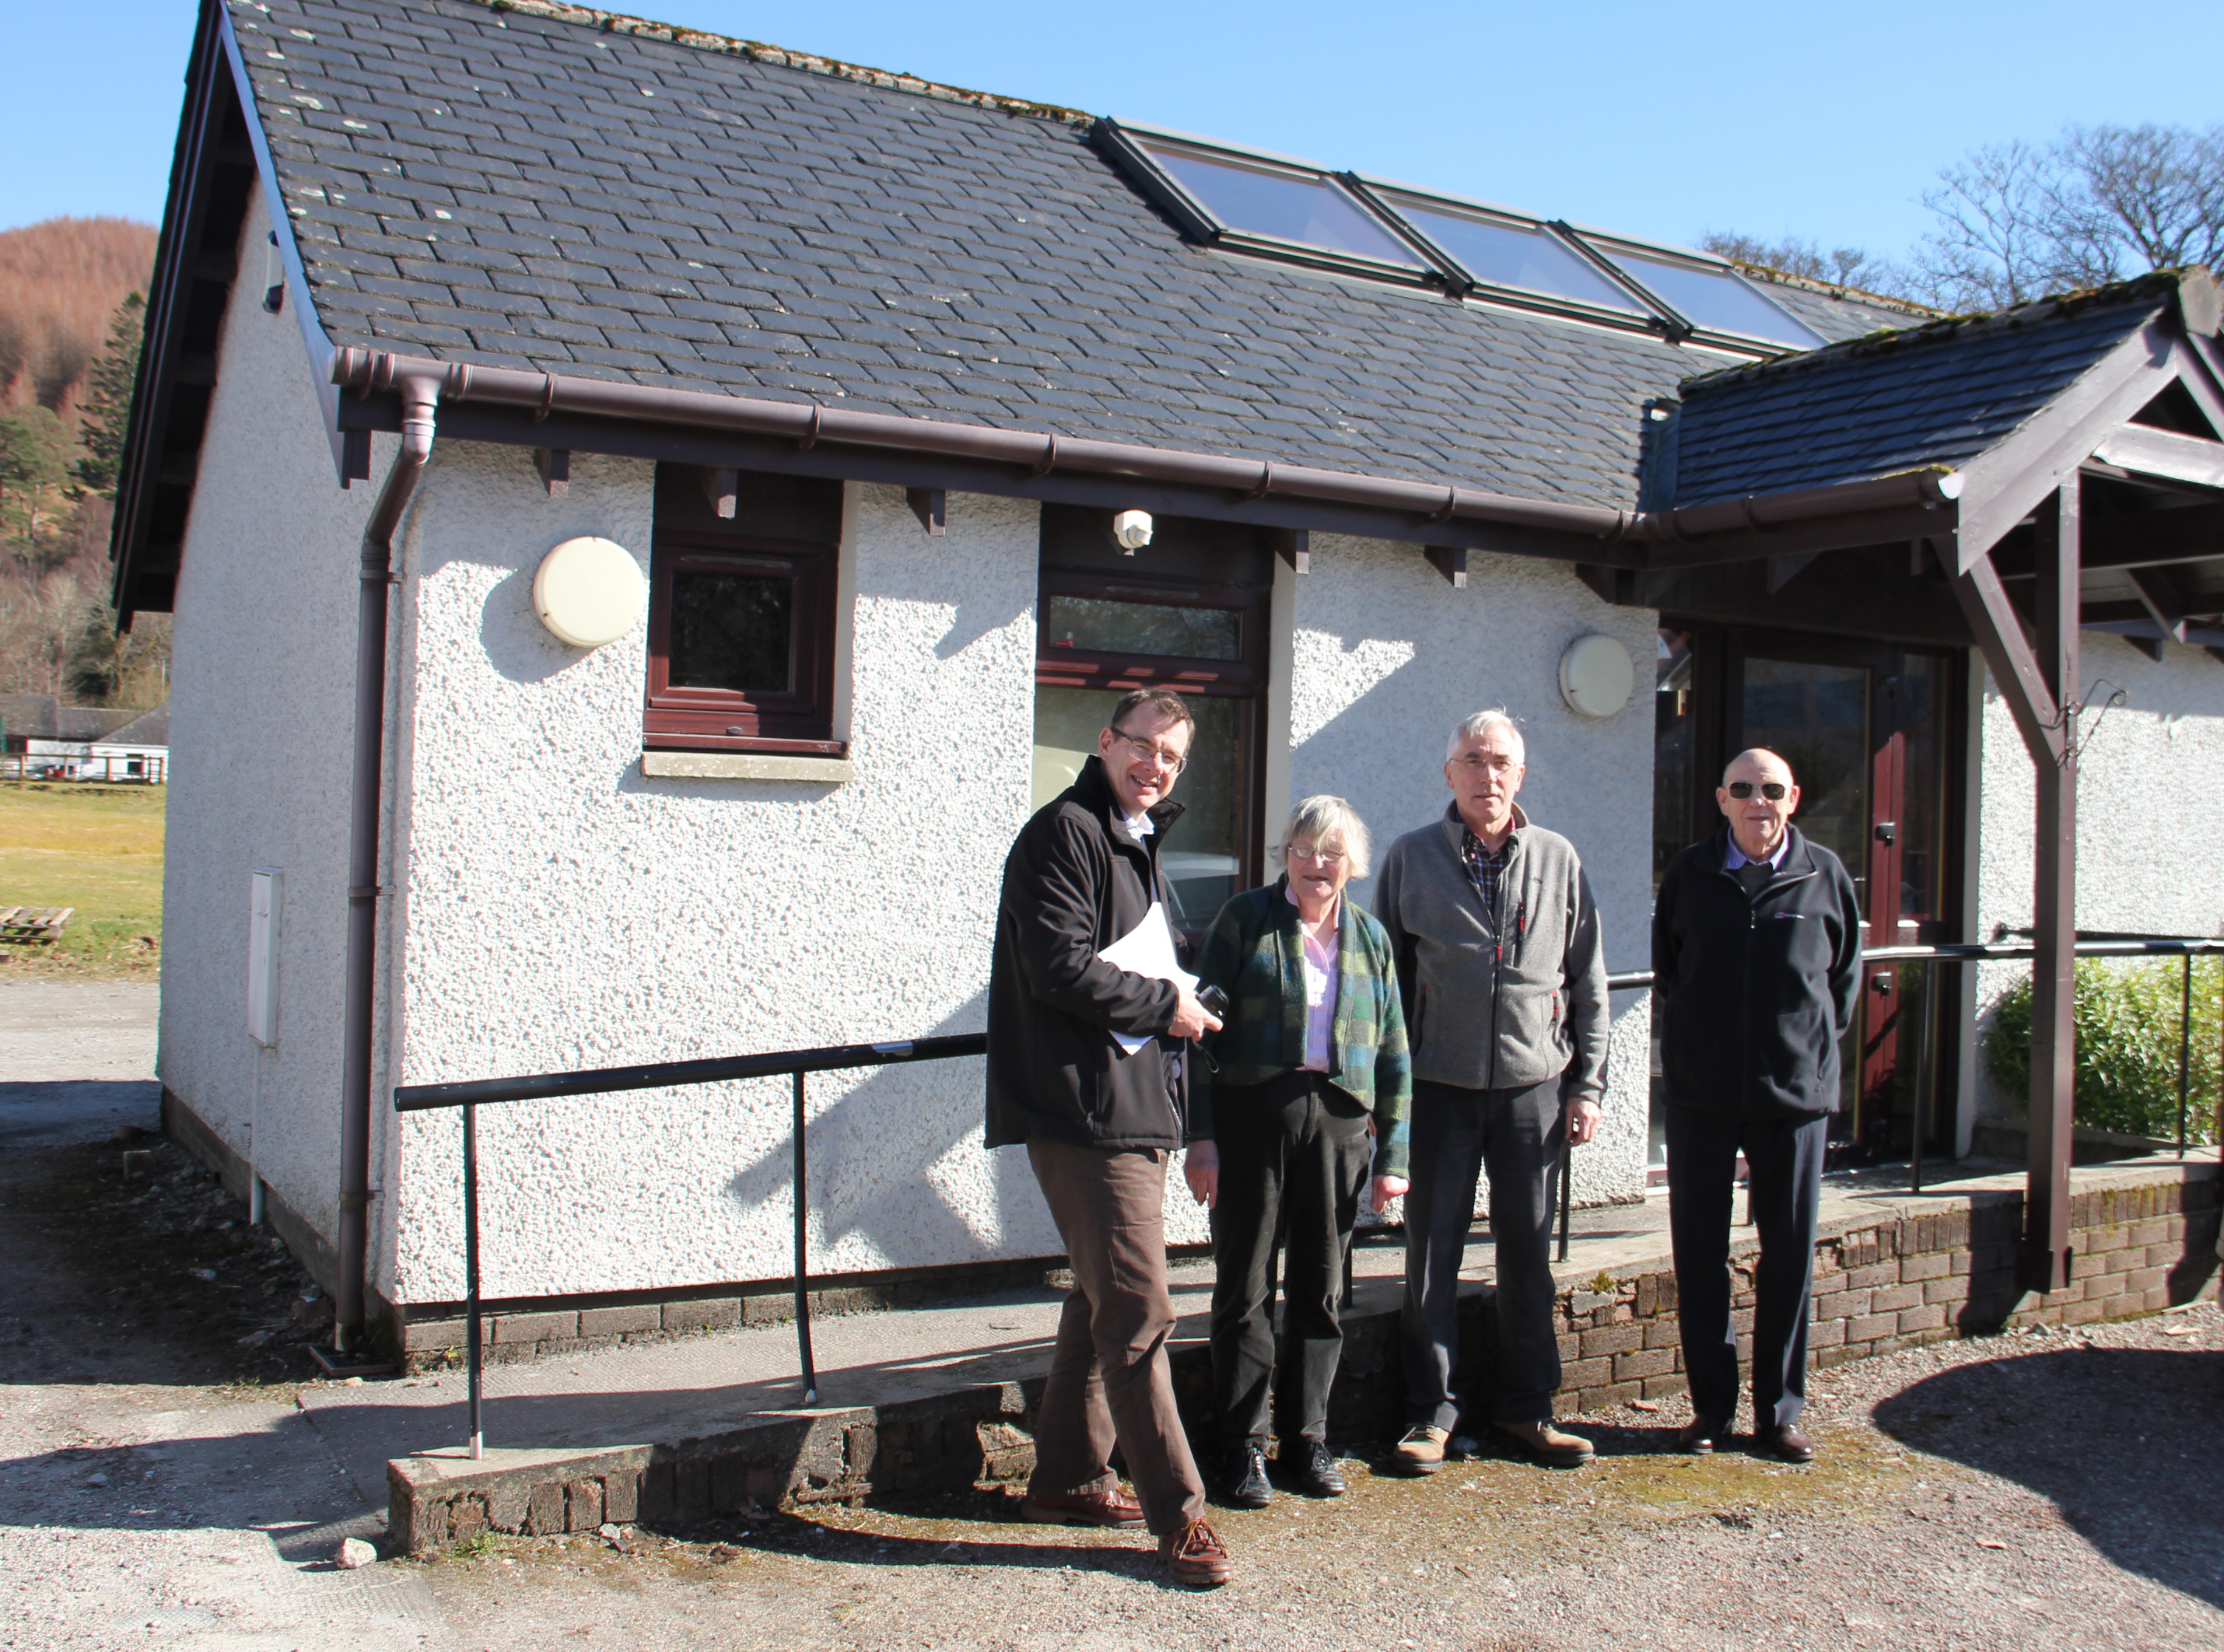 Sunart Community Company is planning to buy the former Visitor Information Centre in the remote village of Strontian